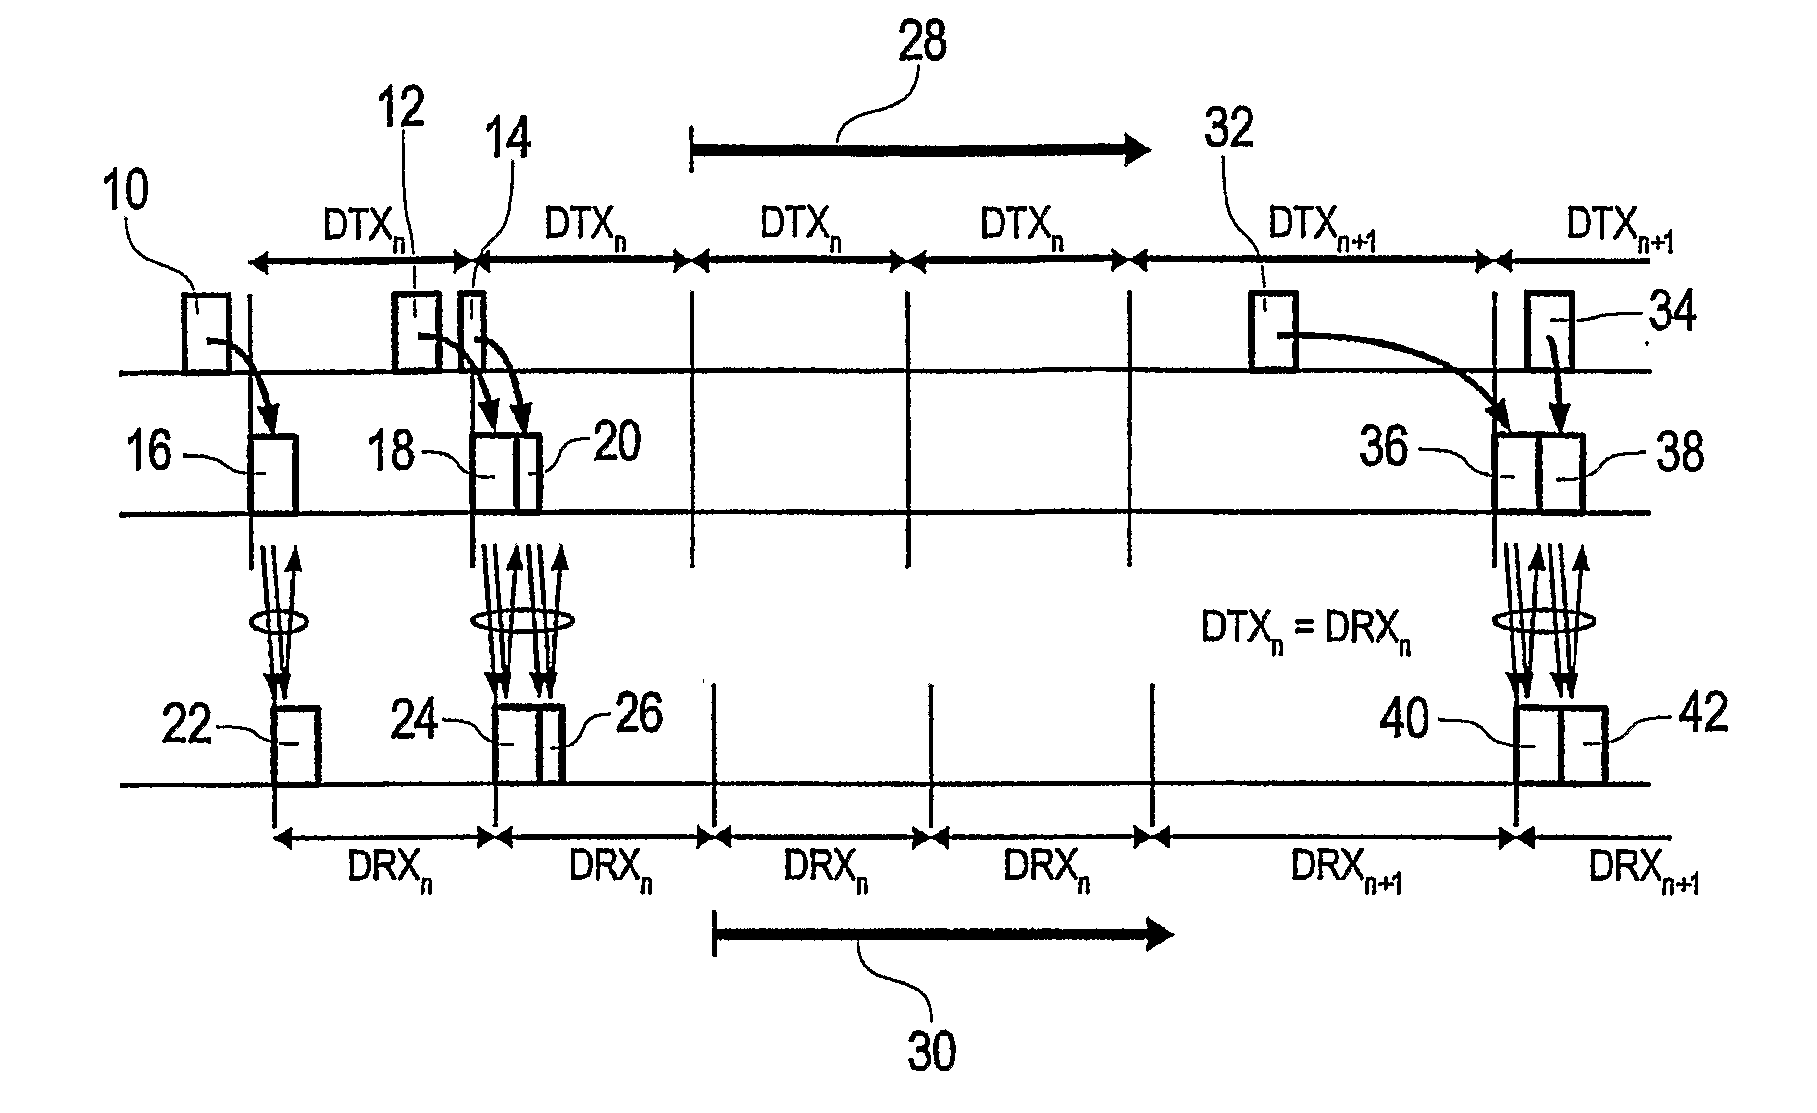 Discontinuous reception/transmission for mobile communication system